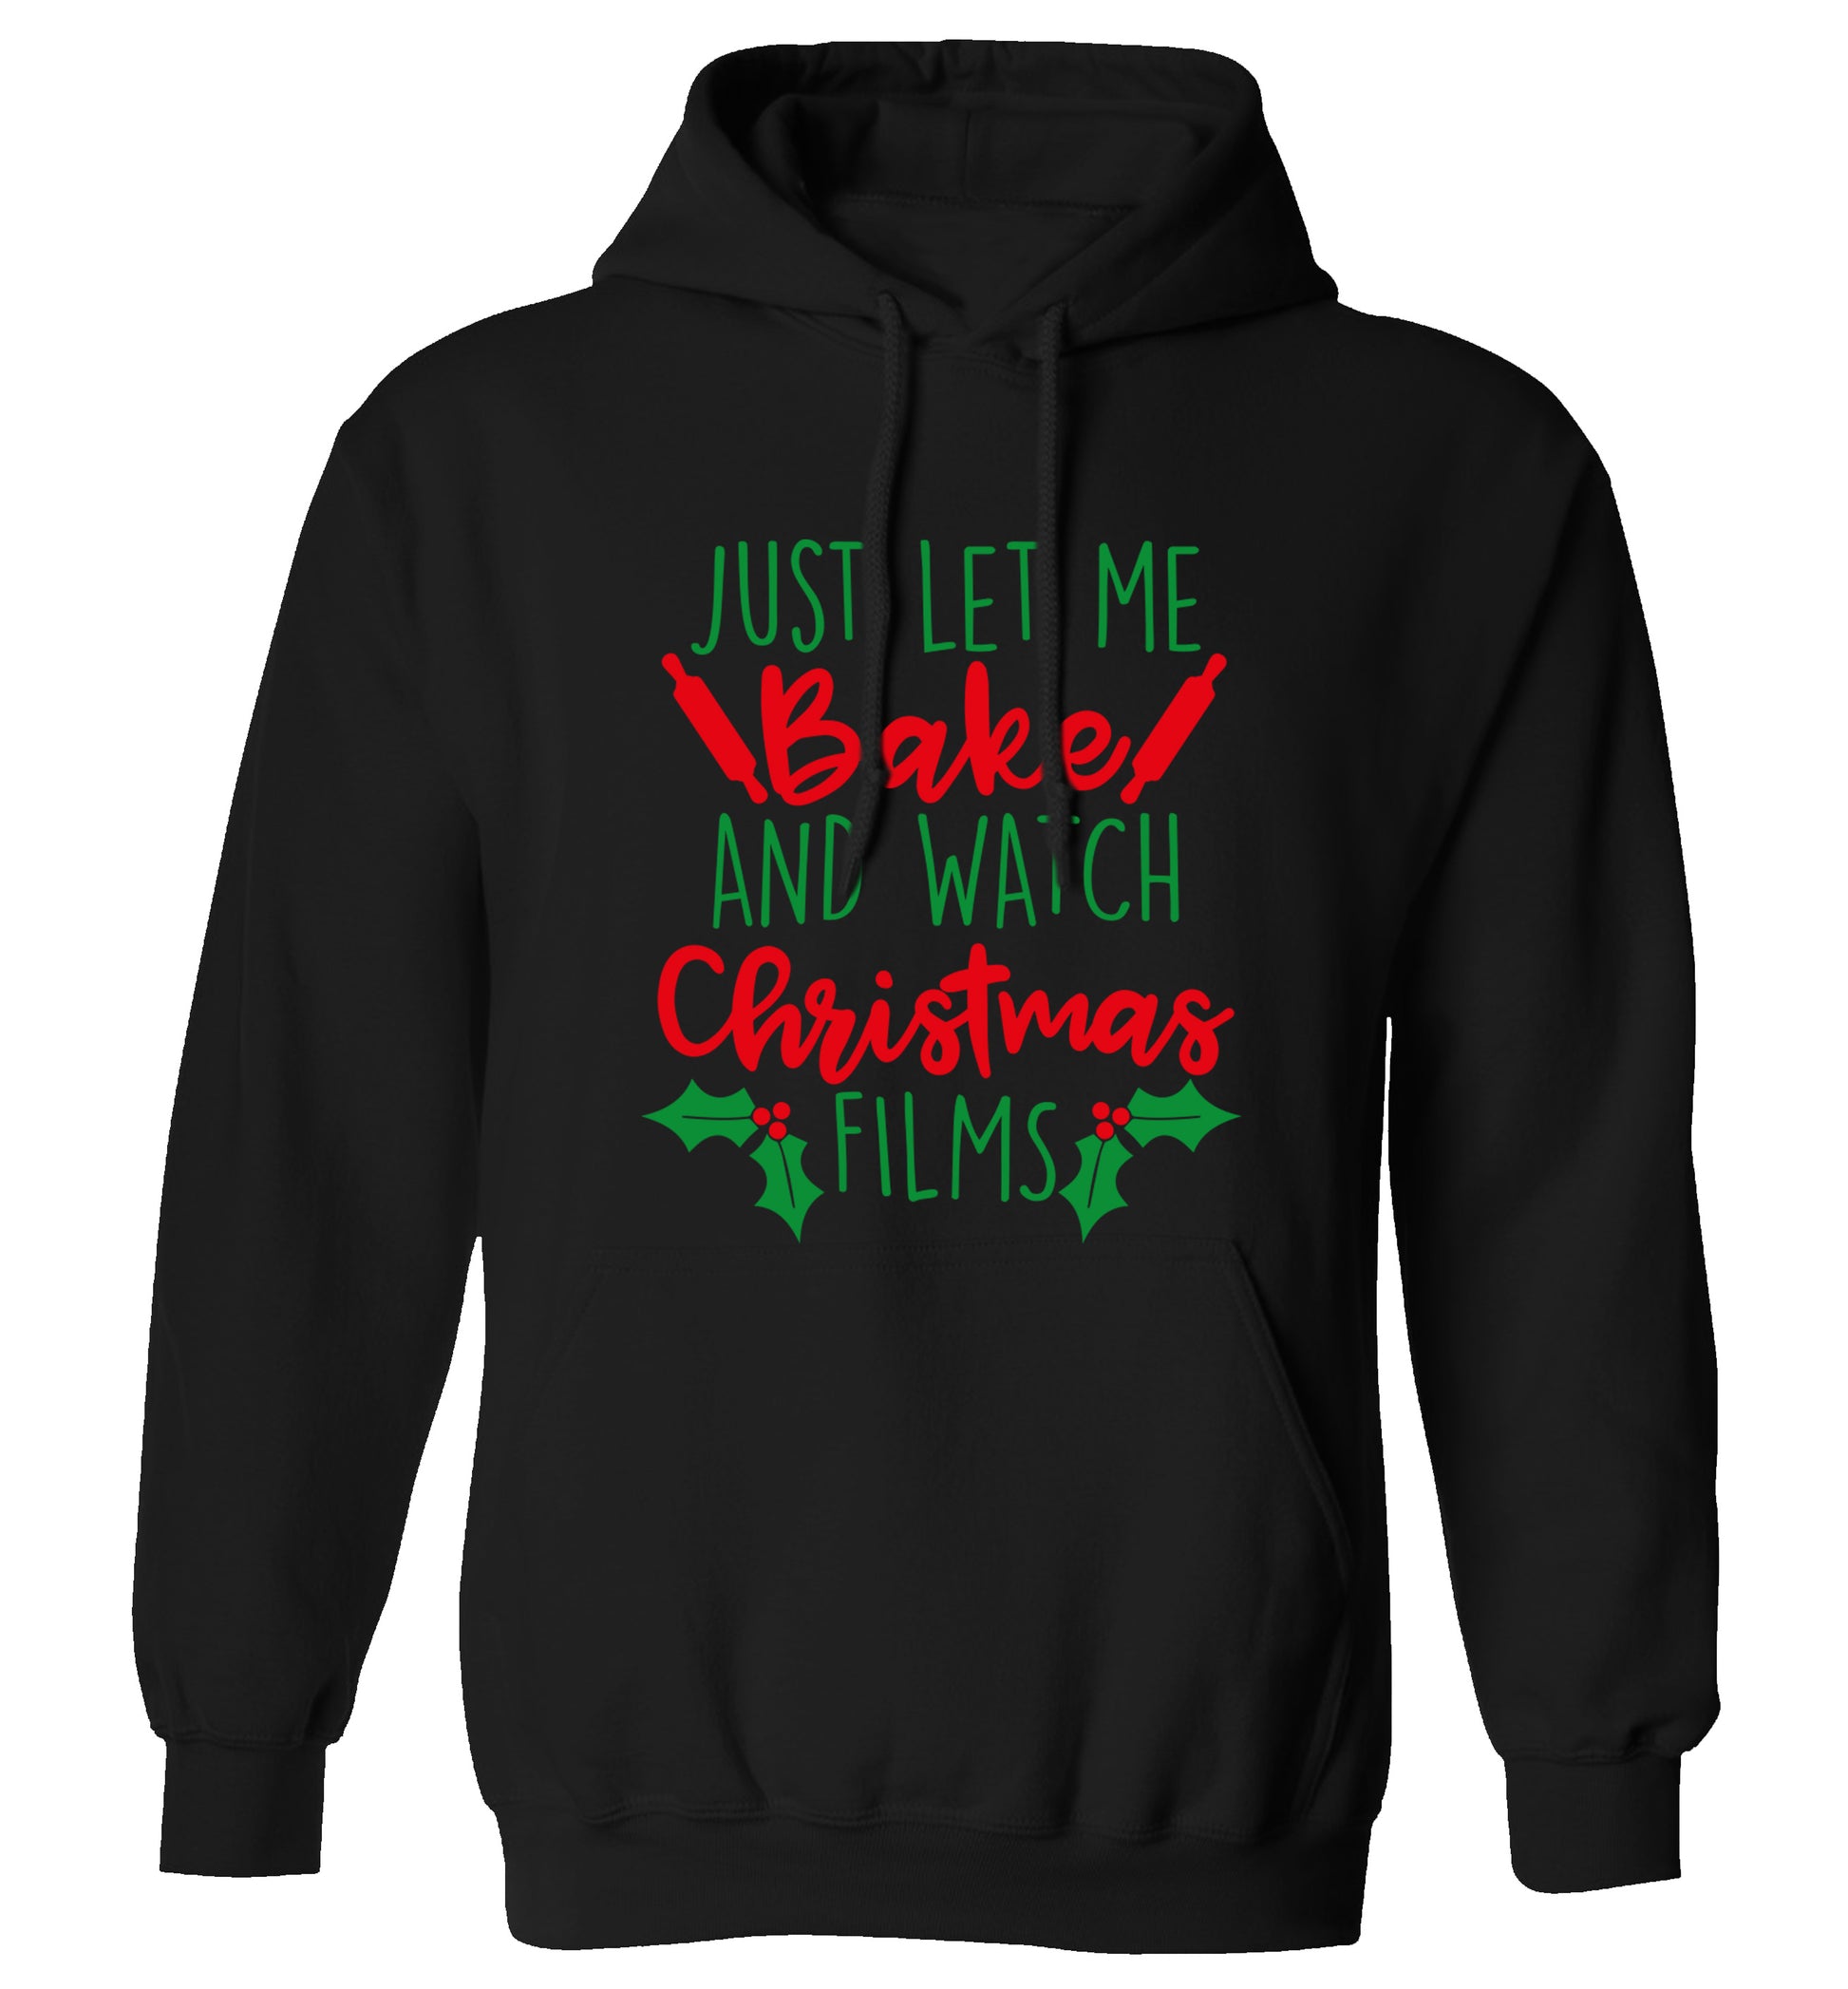 Just let me bake and watch Christmas films adults unisex black hoodie 2XL